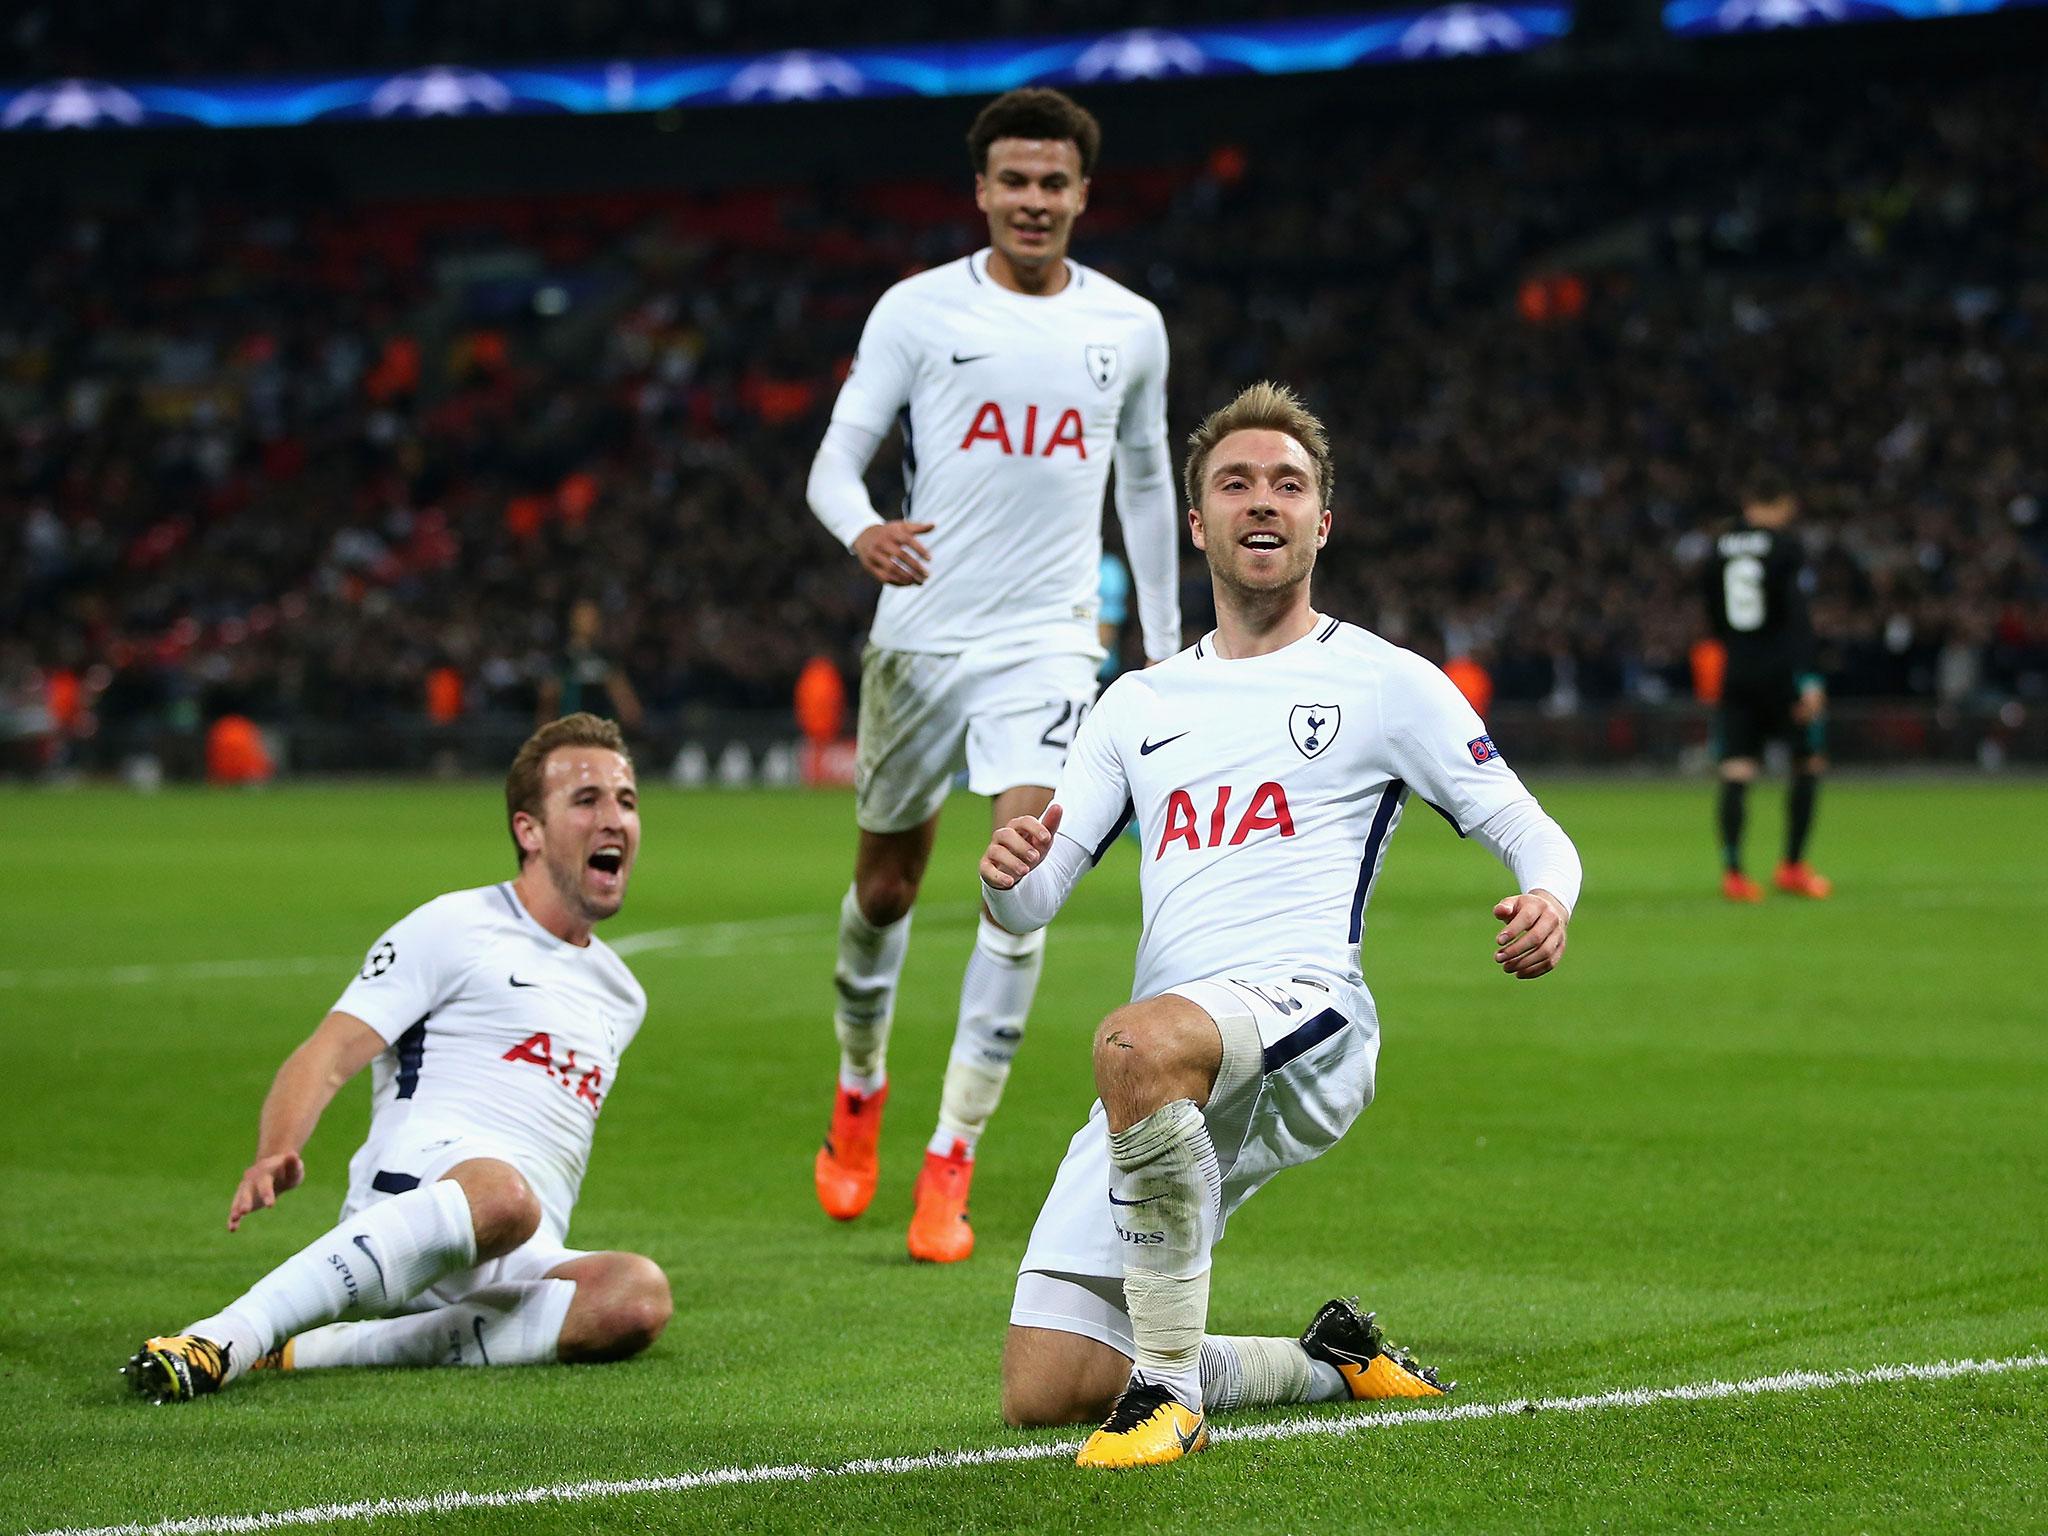 Tottenham proved their European credentials last month with the 3-1 win over Real Madrid